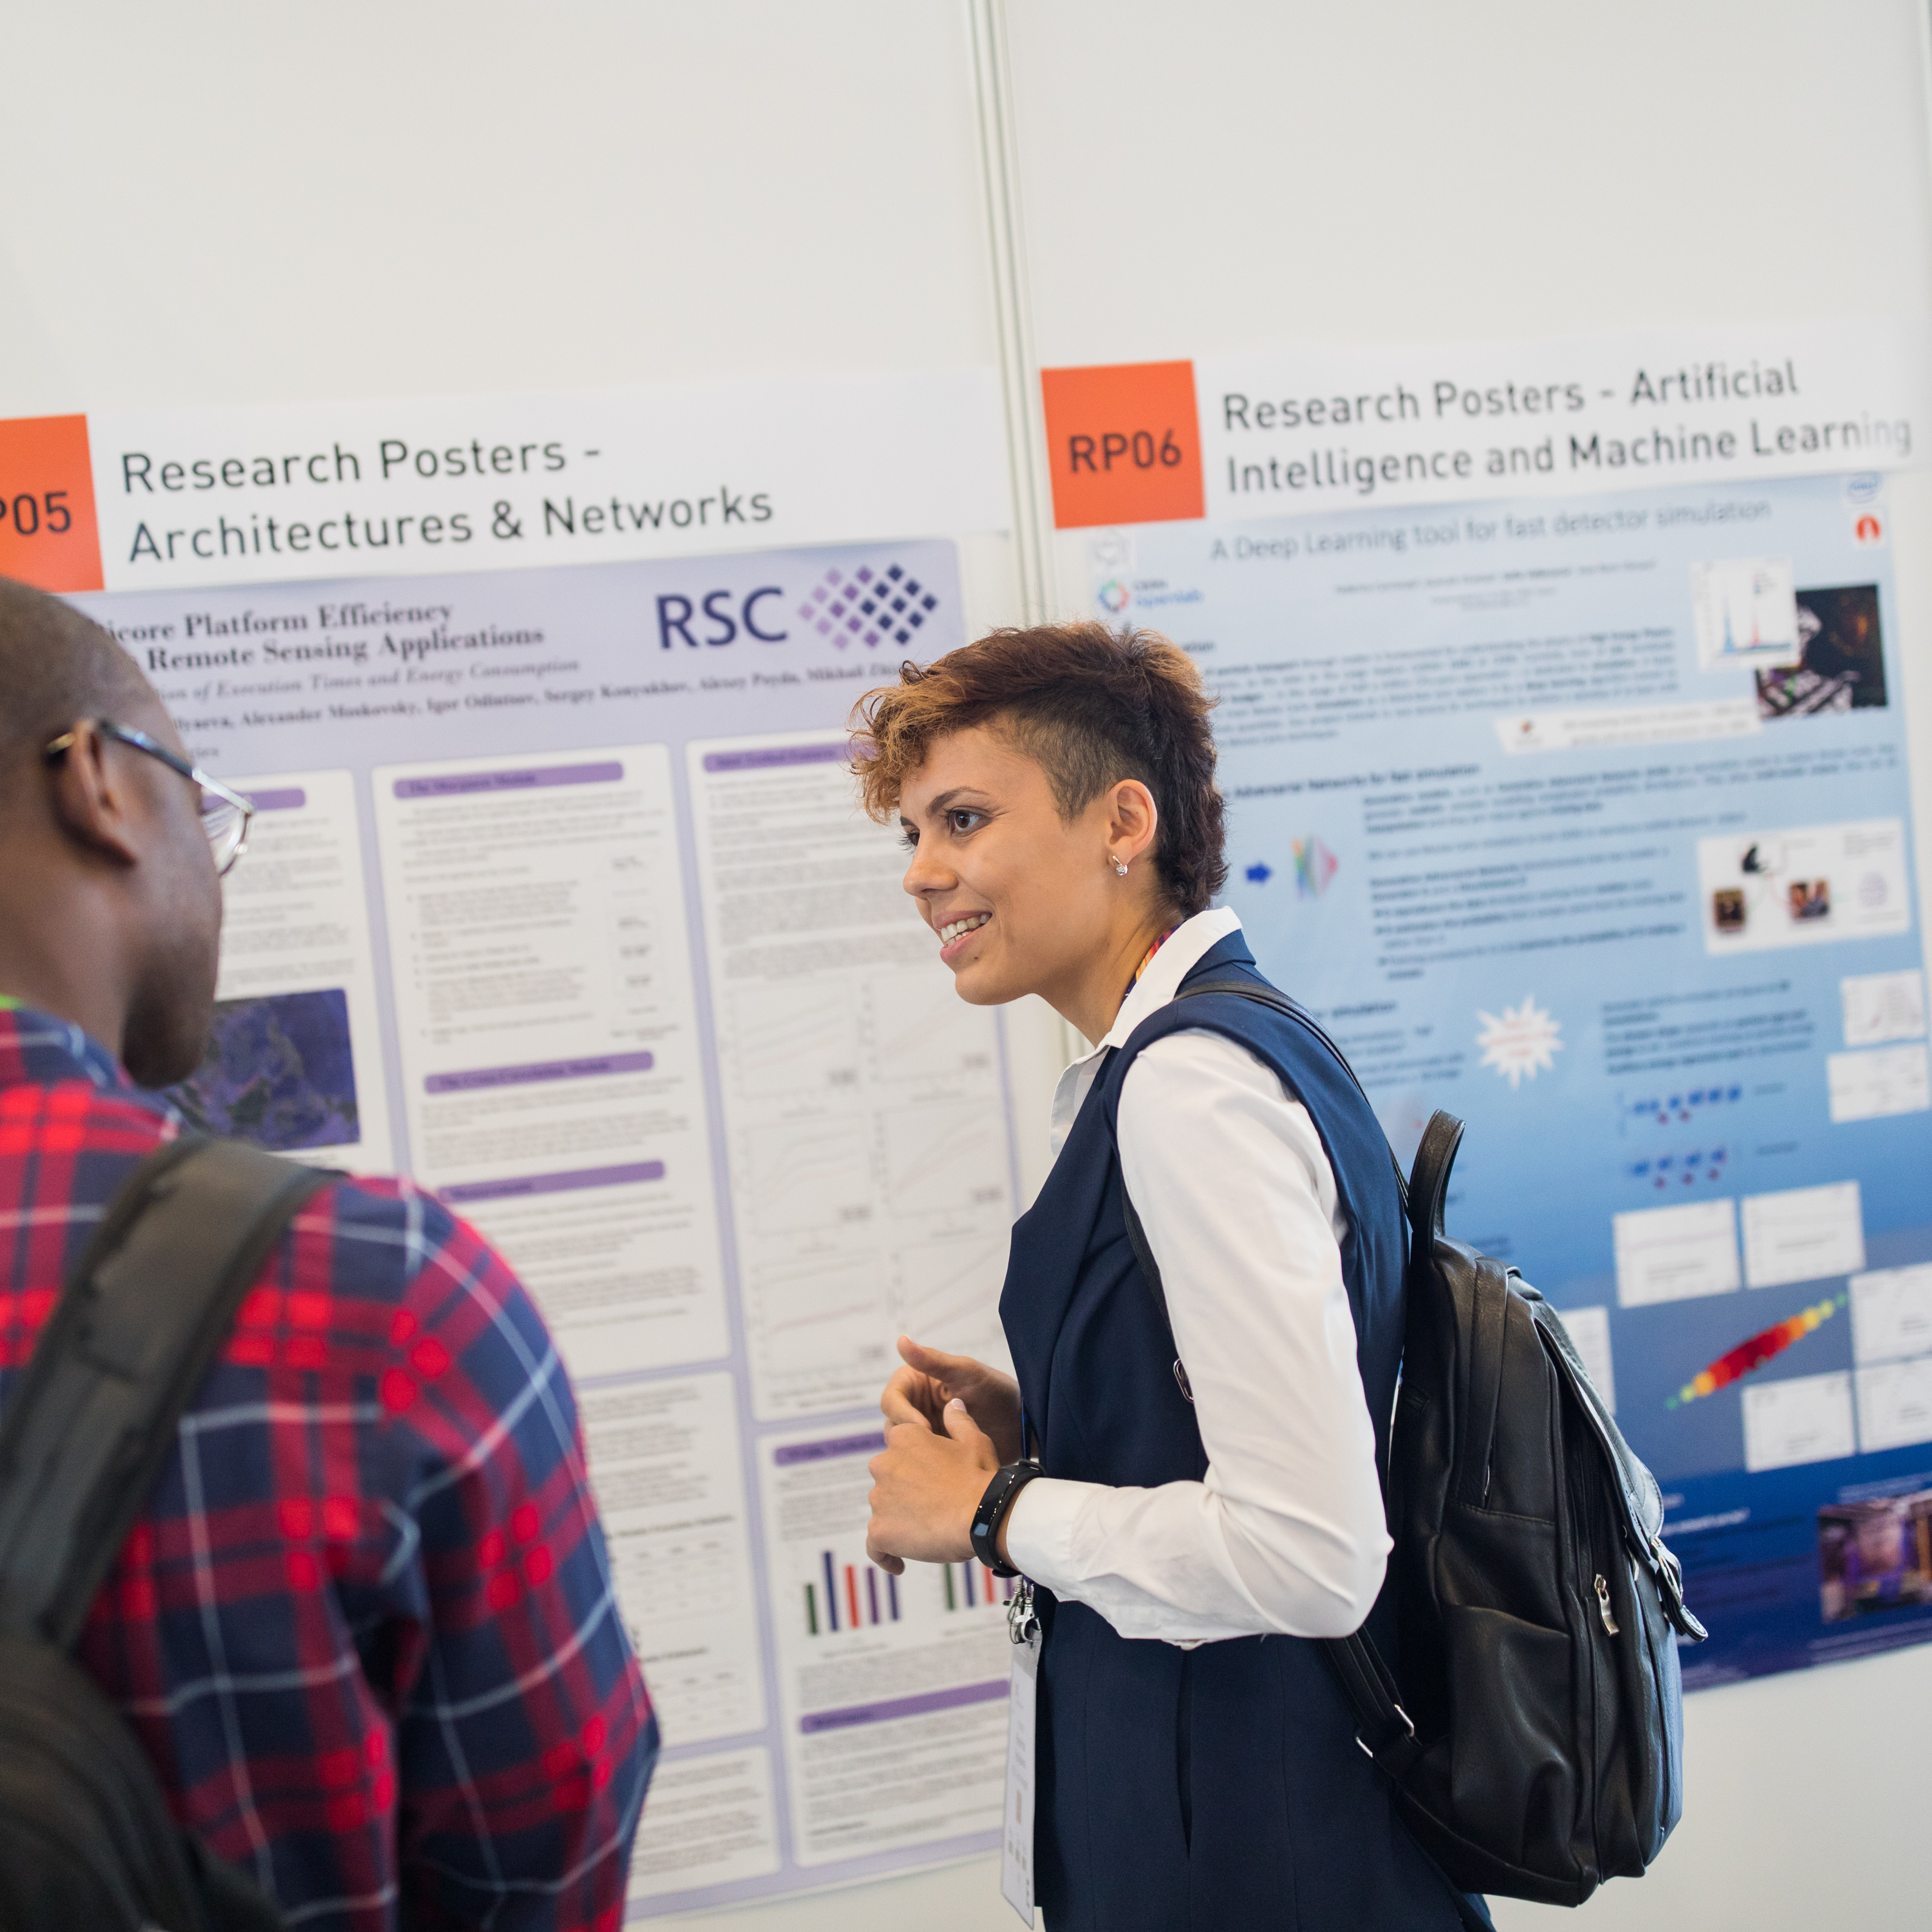 ISC 2019 Research Posters Exhibition